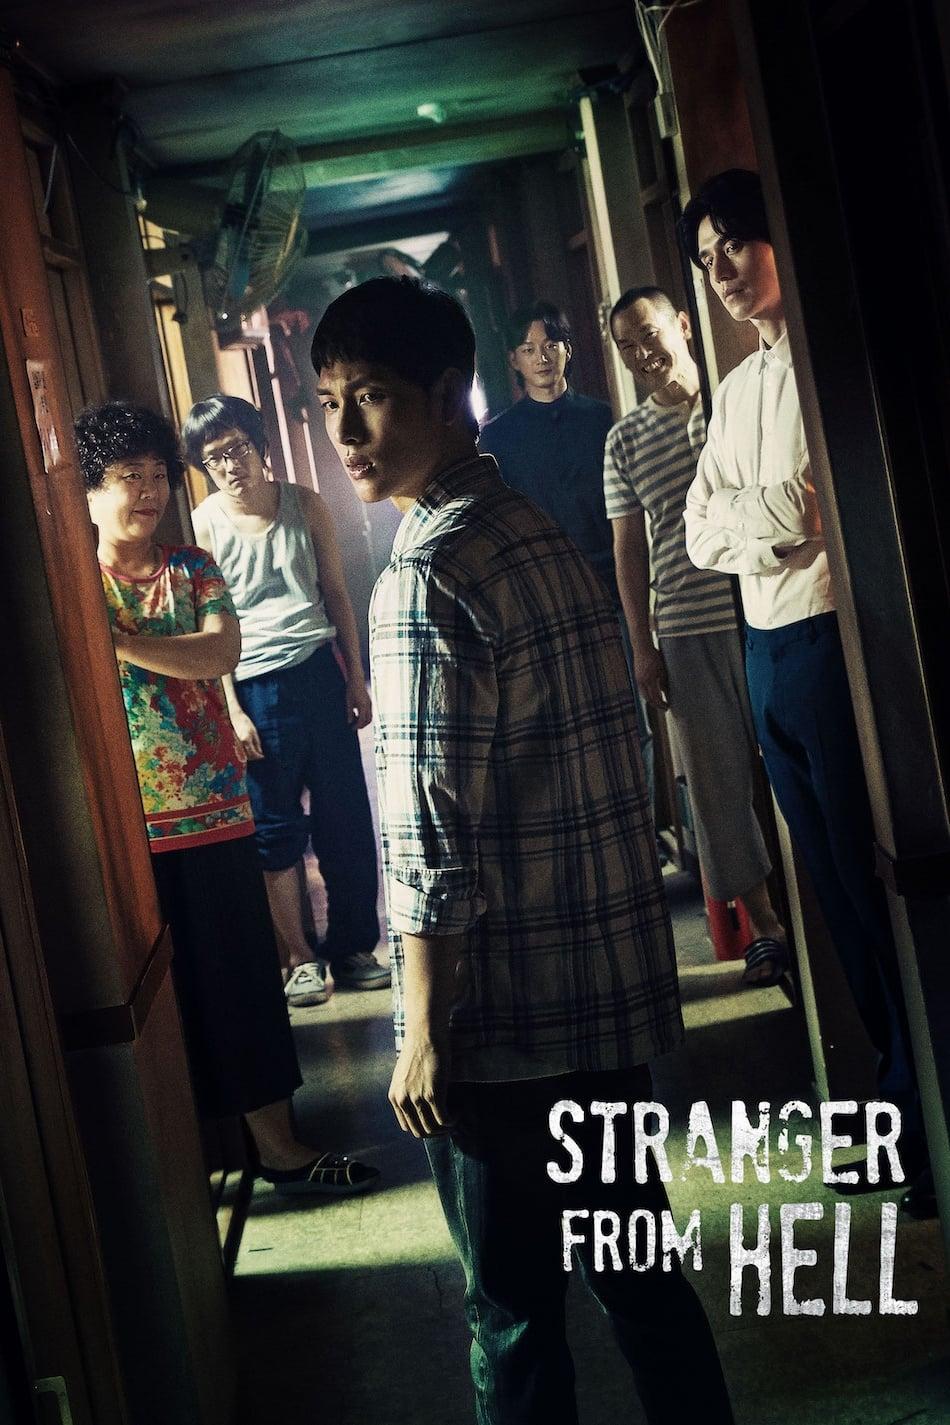 Strangers from Hell poster